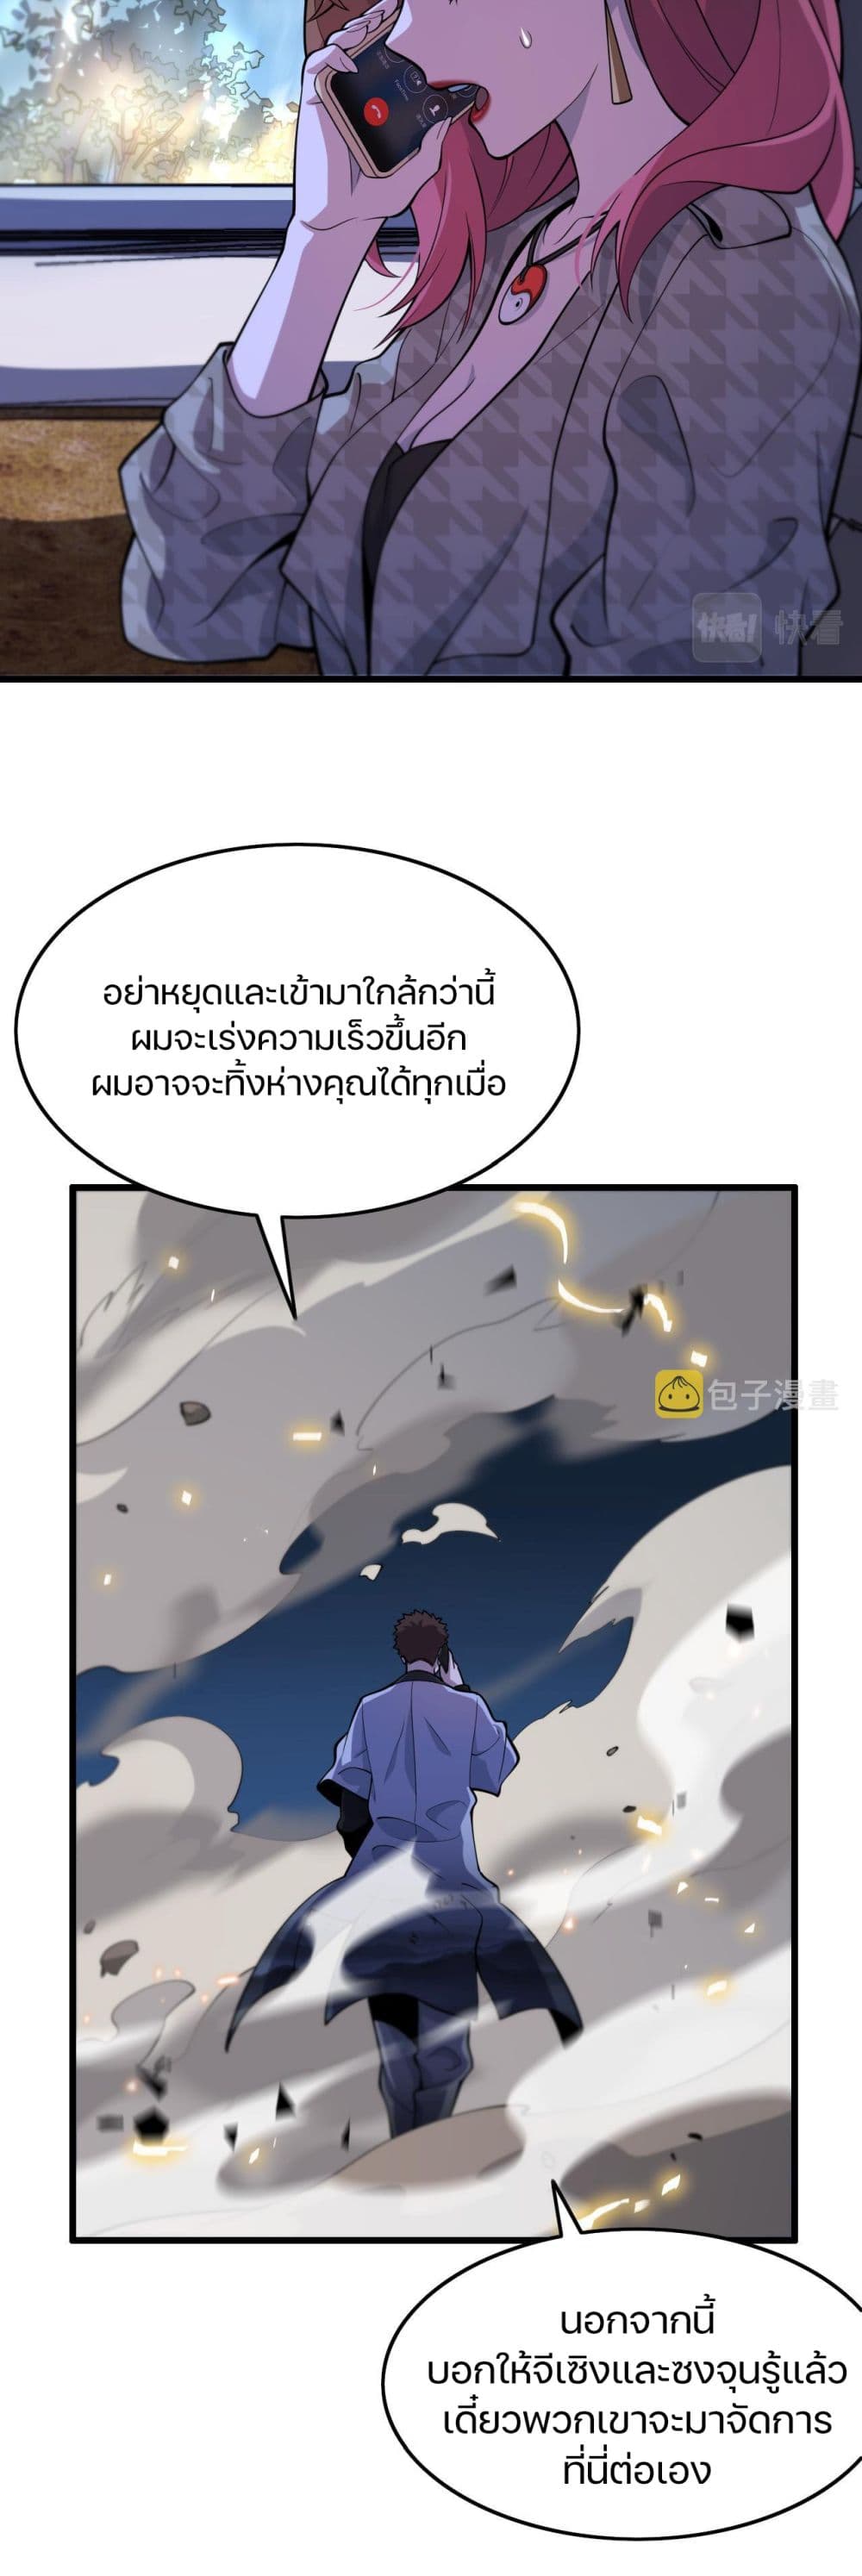 The Grand Master came down from the Mountain 43-ตกปลาตัวใหญ่